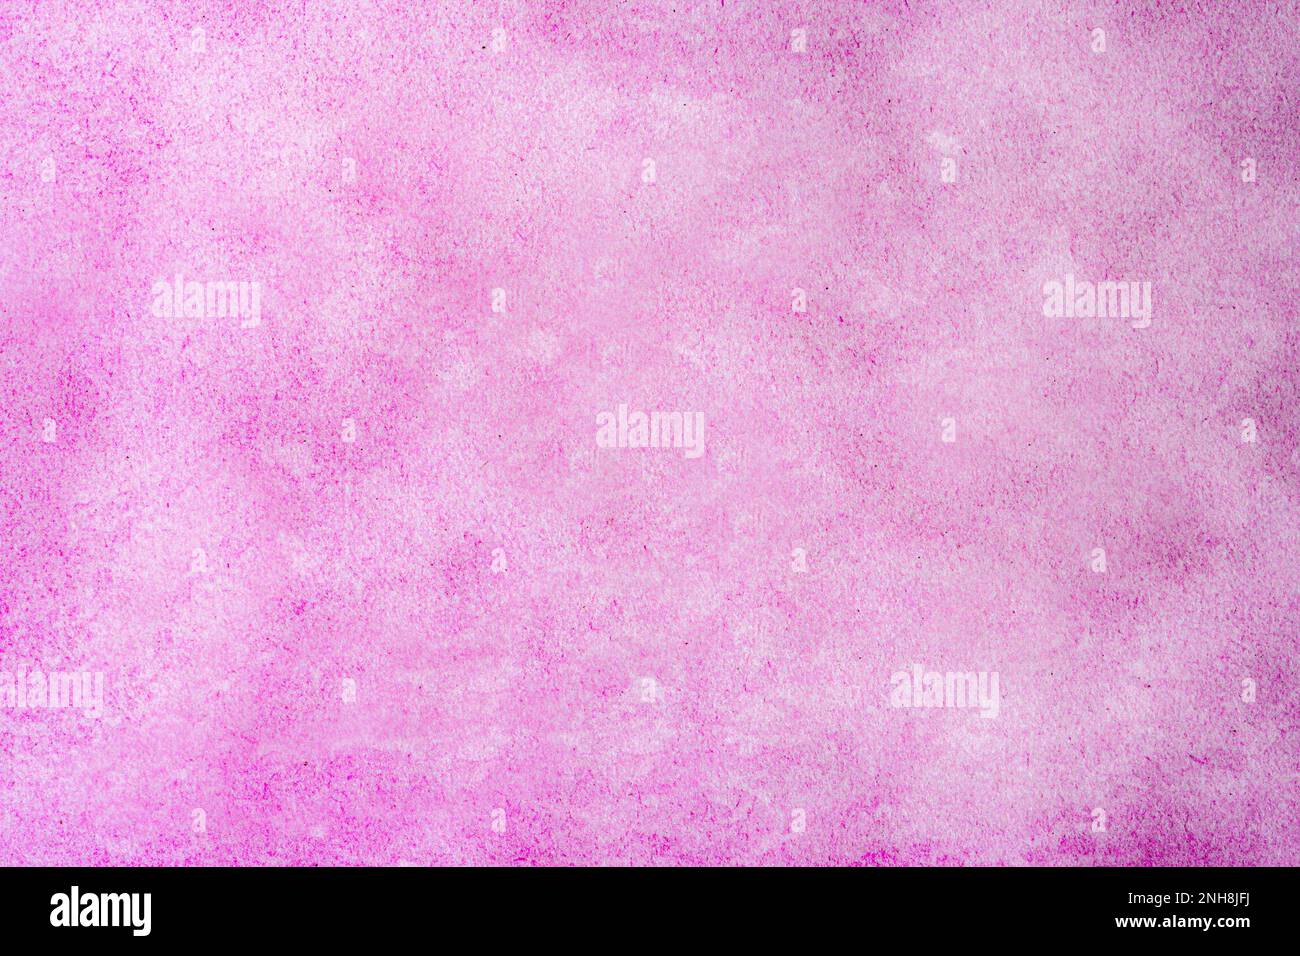 https://c8.alamy.com/comp/2NH8JFJ/alcohol-ink-peach-transparent-background-pink-soft-and-bright-ink-texture-modern-luxury-paint-natural-colors-with-glitter-template-for-banner-high-2NH8JFJ.jpg